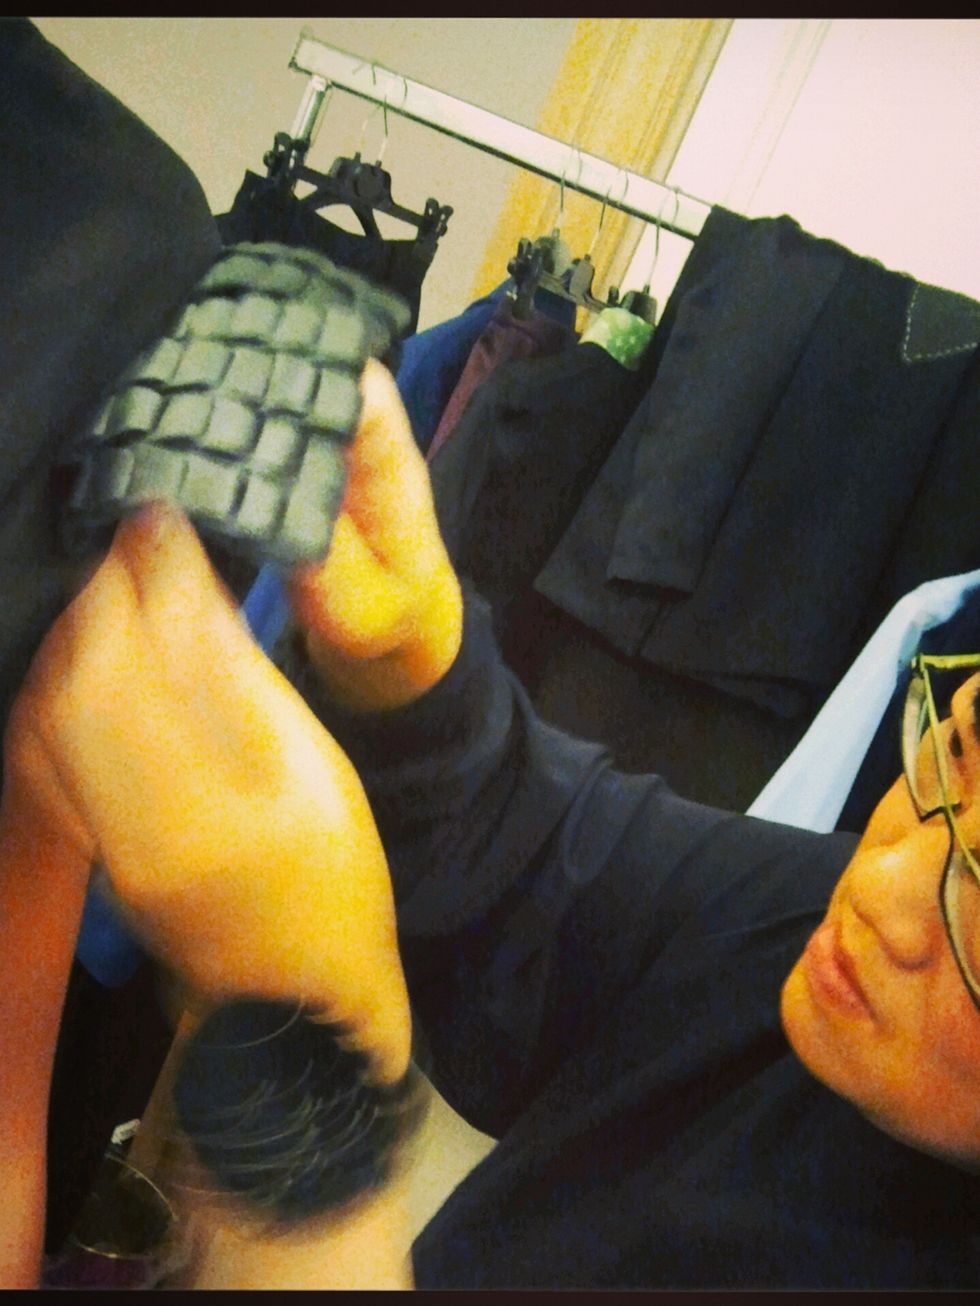 Glasses, Wrist, Comfort, Black hair, Glove, Fictional character, Couch, Sole, Foot, Toe, 